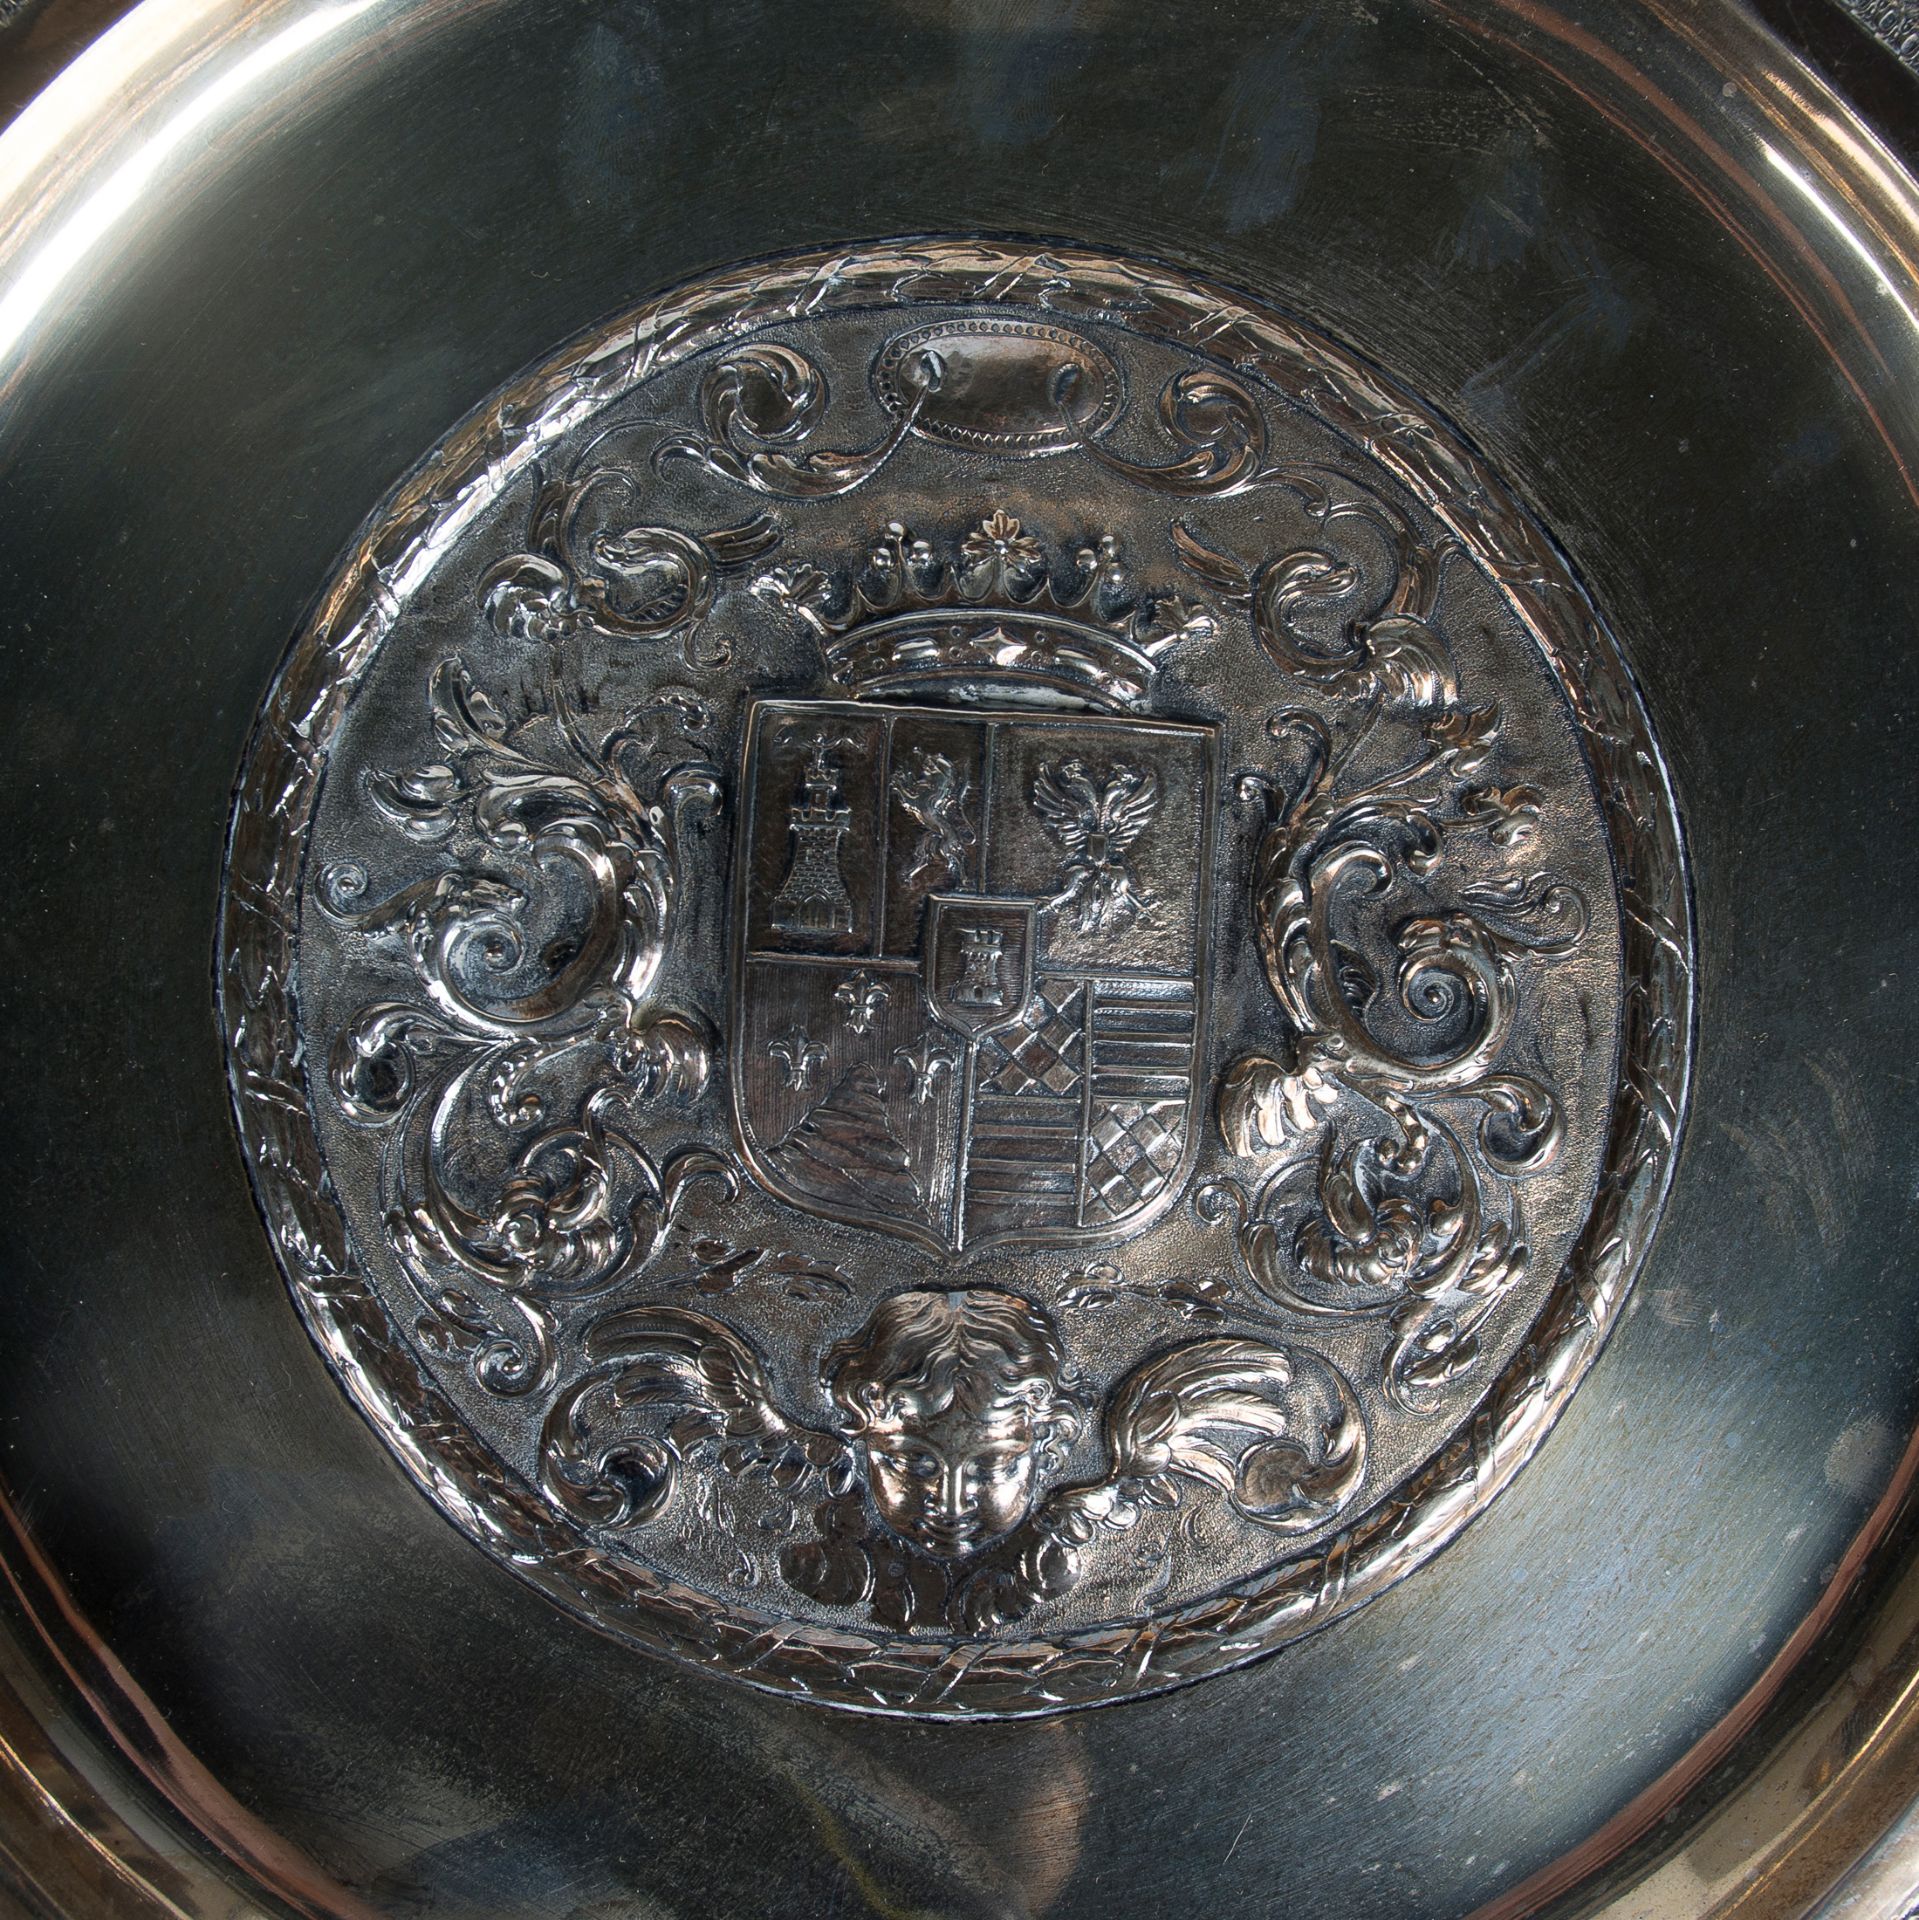 Large, embossed and chased silver plate. 19th century. - Image 3 of 7